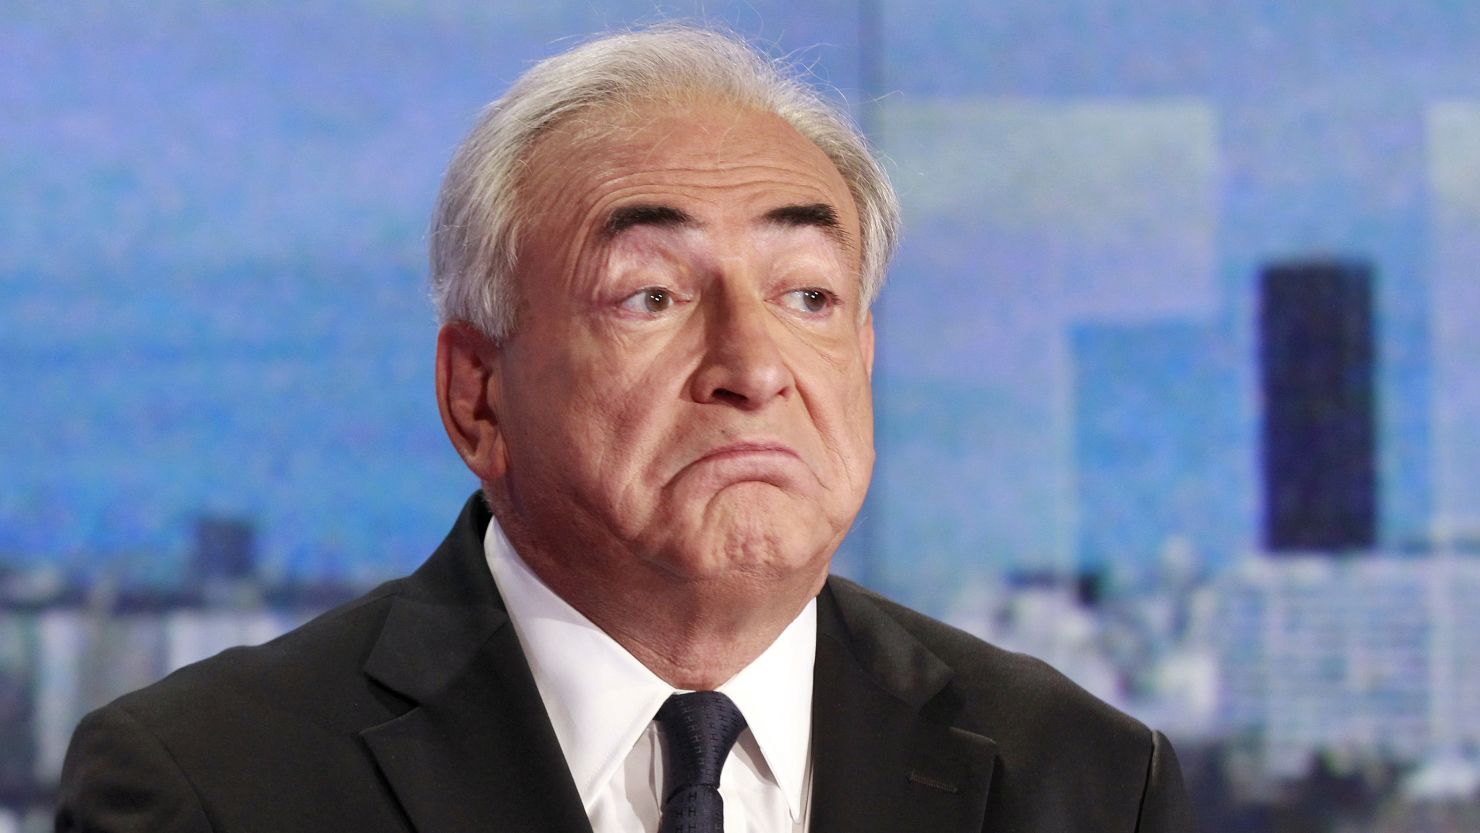 The scandal ended Dominique Strauss-Kahn's career as head of the IMF and his political ambitions.